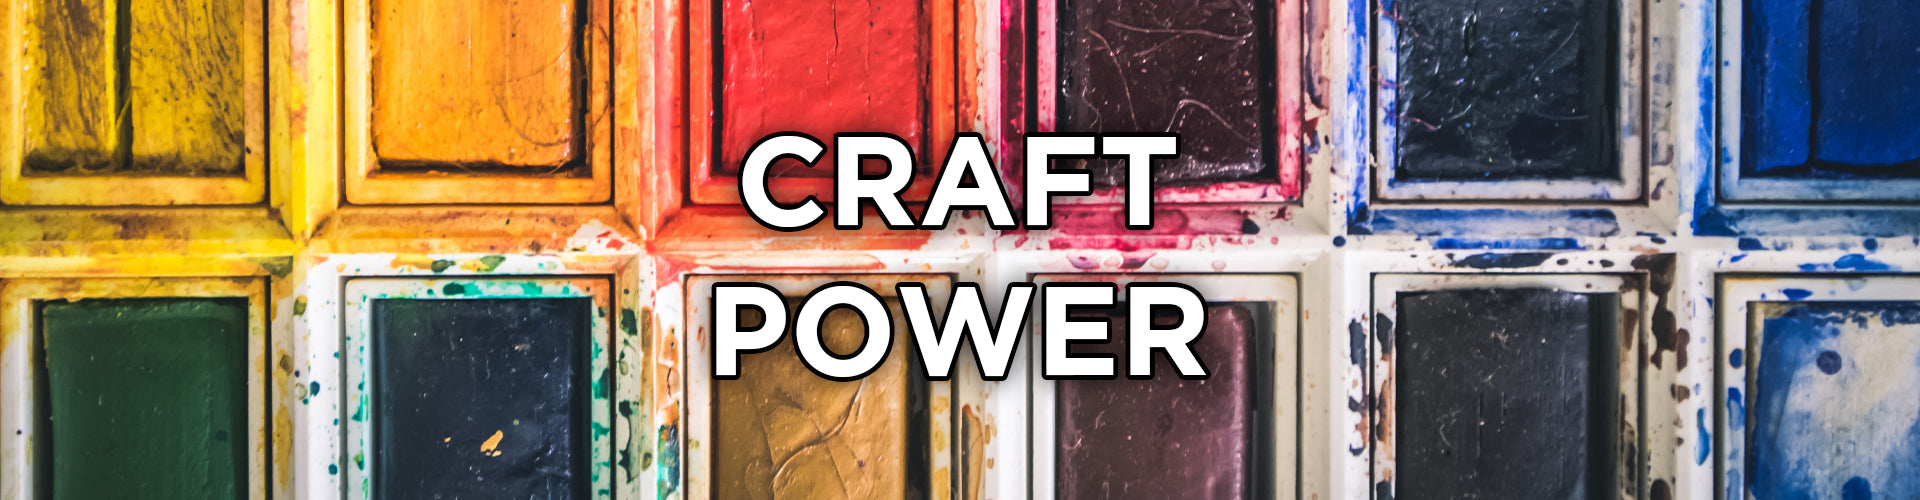 Craft Power: Coming to a Screen Near You!